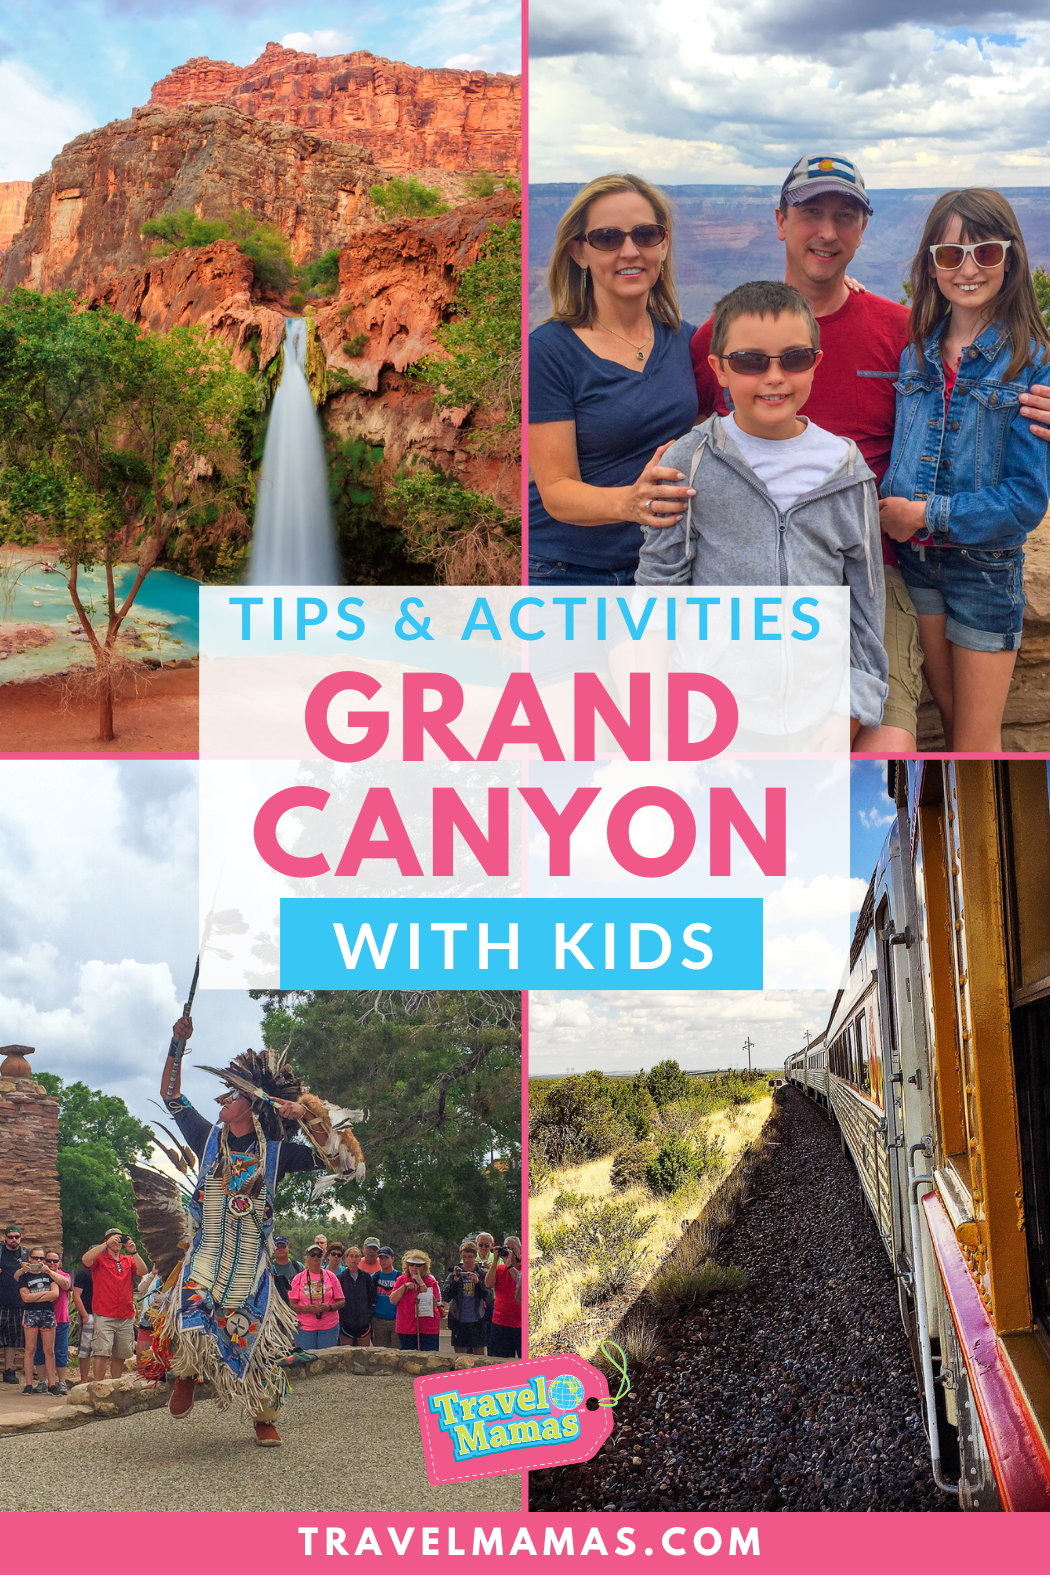 Grand Canyon with Kids Tips & Activities